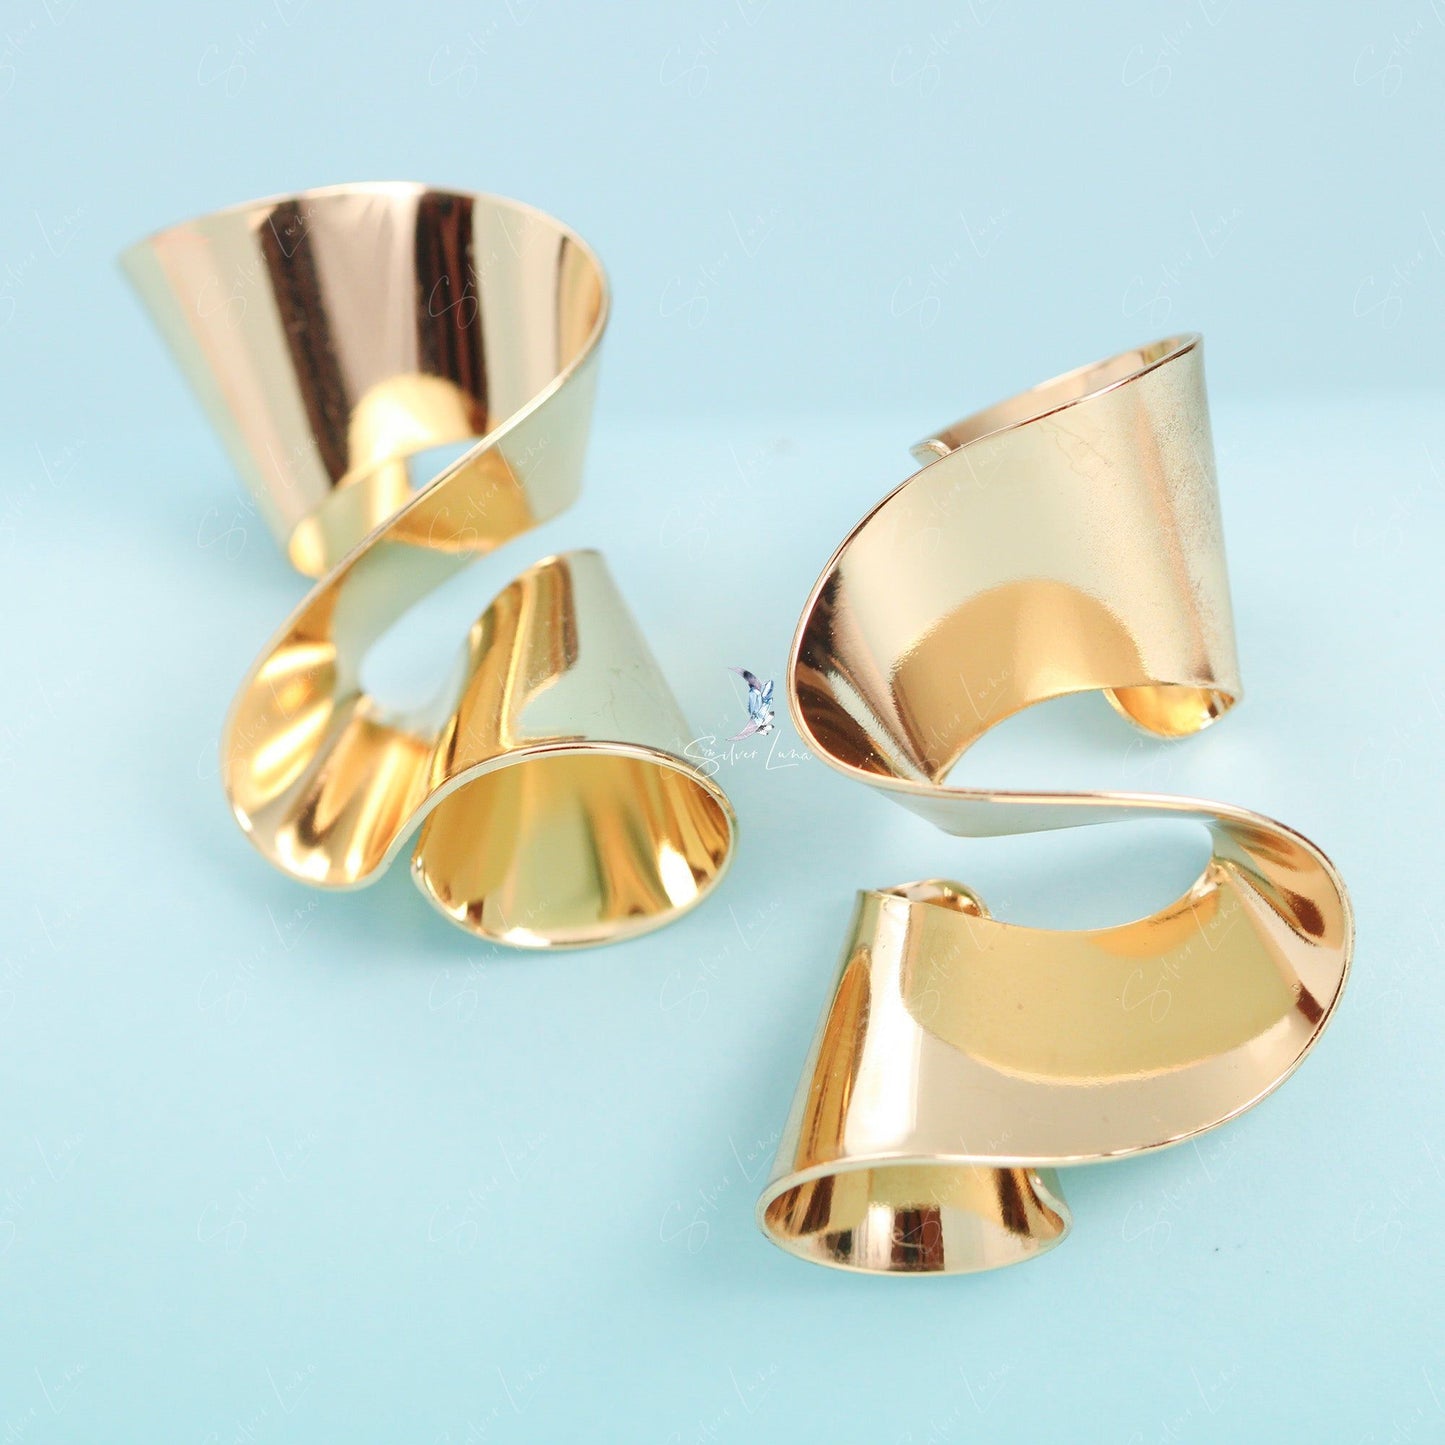 Pencil shave wave statement earrings